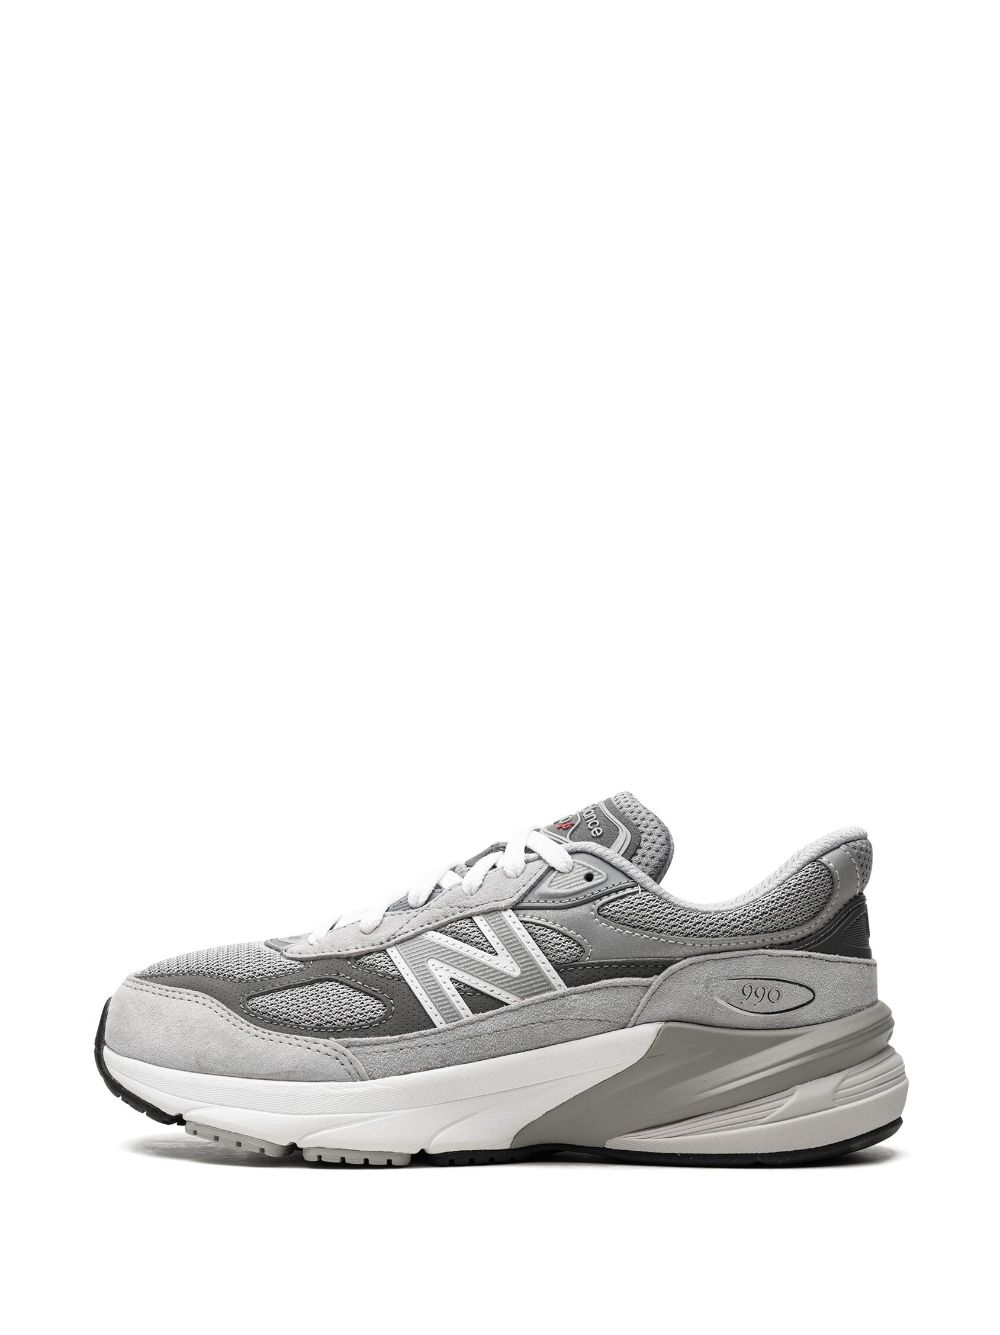 Shop New Balance Fuelcell 990v6 "grey" Sneakers